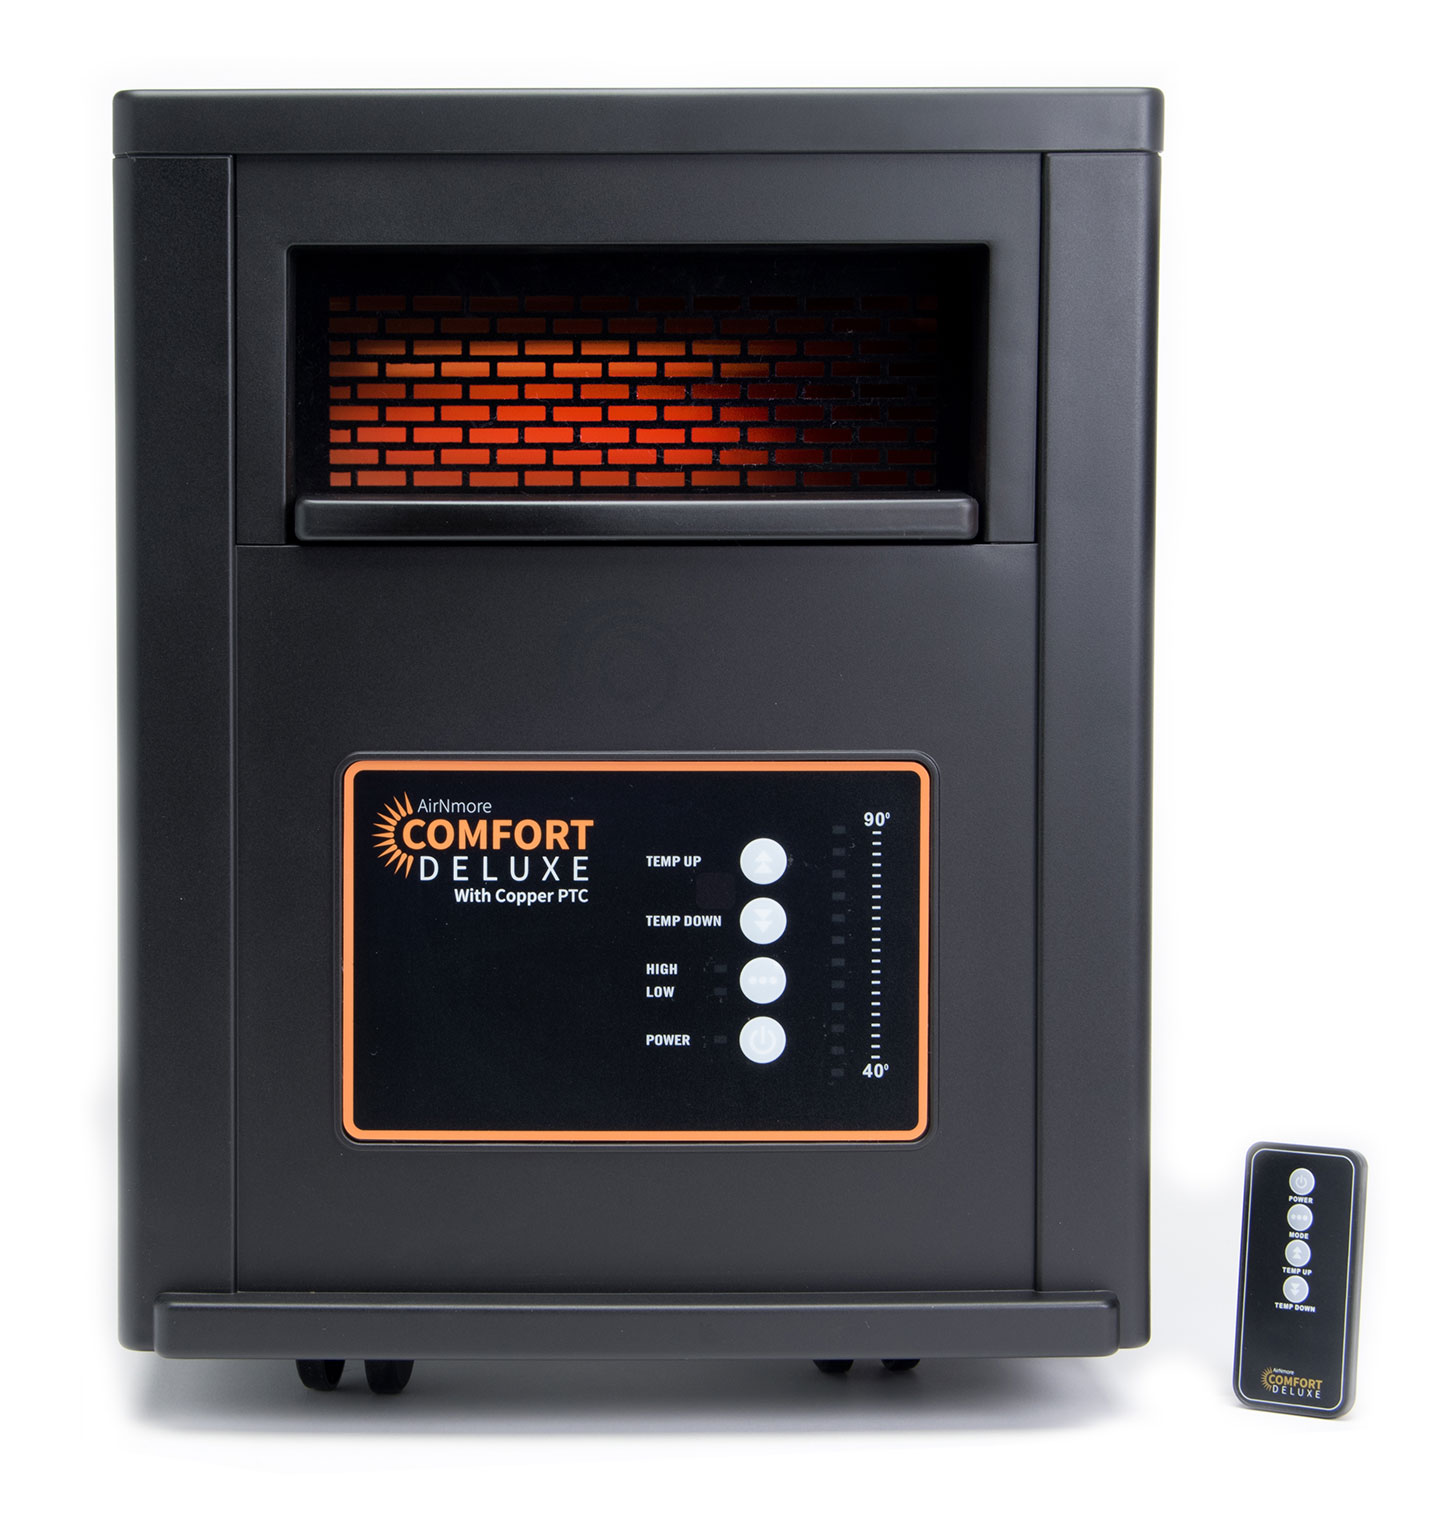 vriendschap Bloody idioom Comfort Deluxe with Copper PTC | Quality is back to the Space Heater